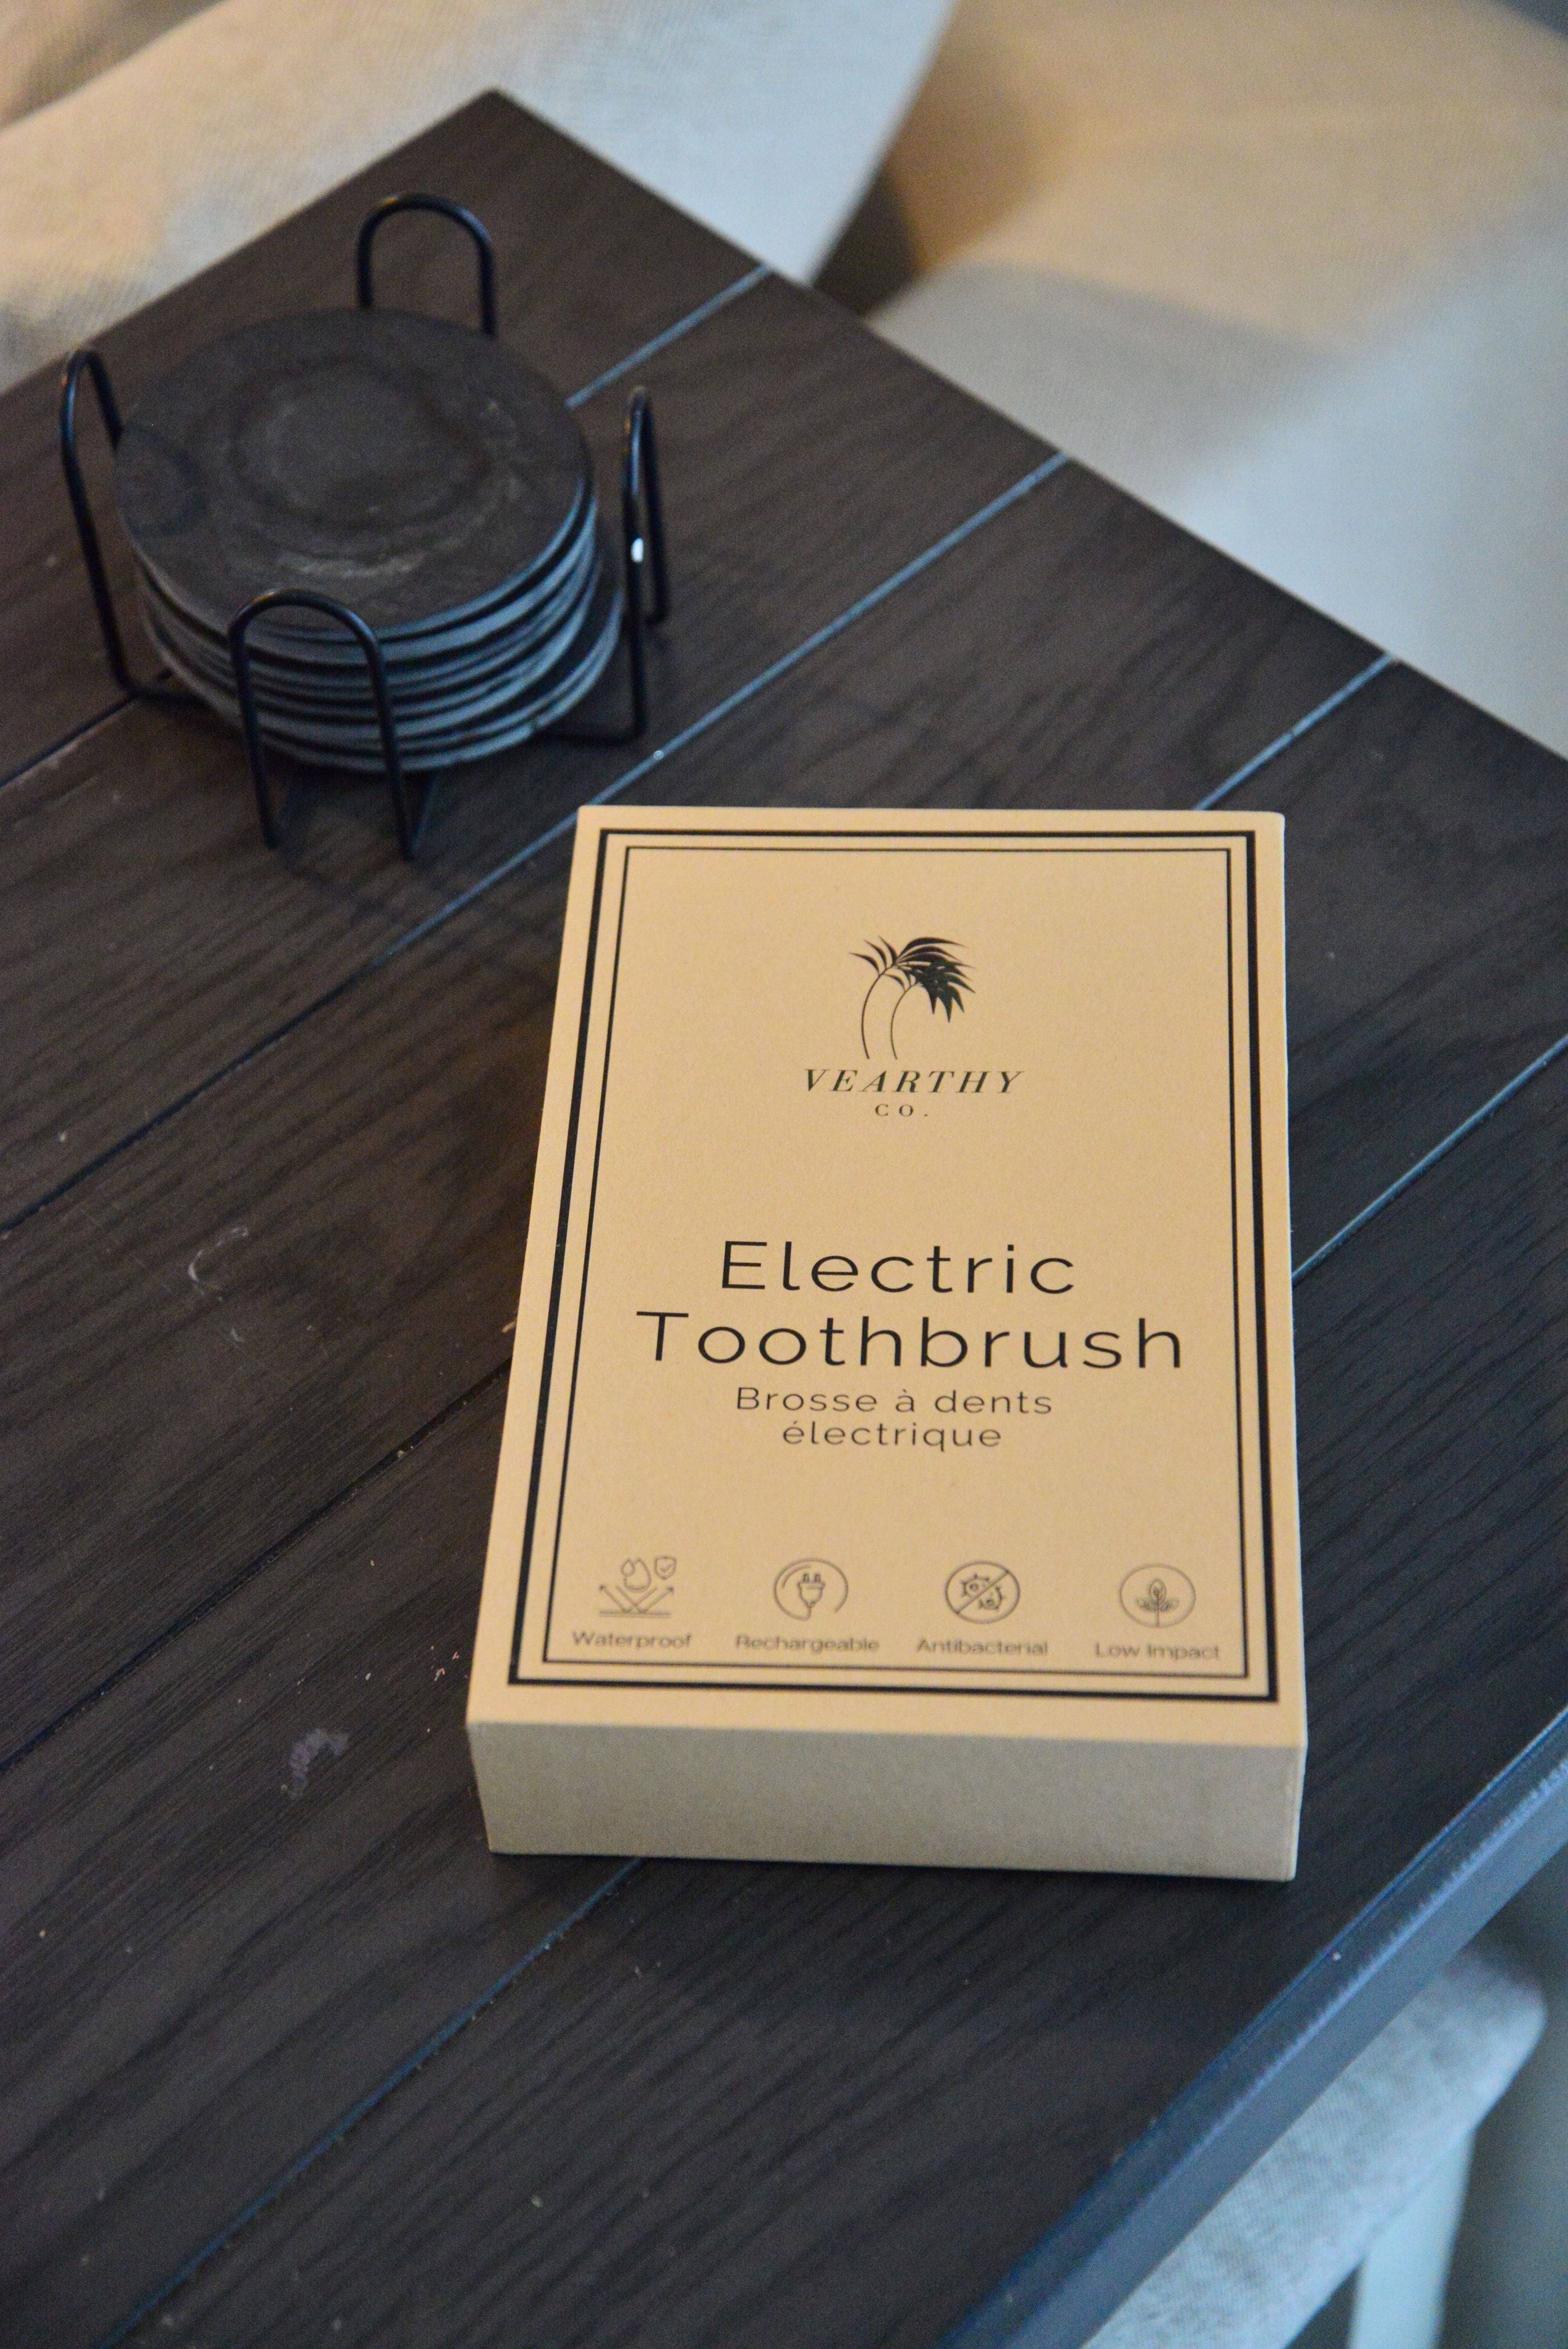 Vearthy bamboo sonic electric toothbrush packaging